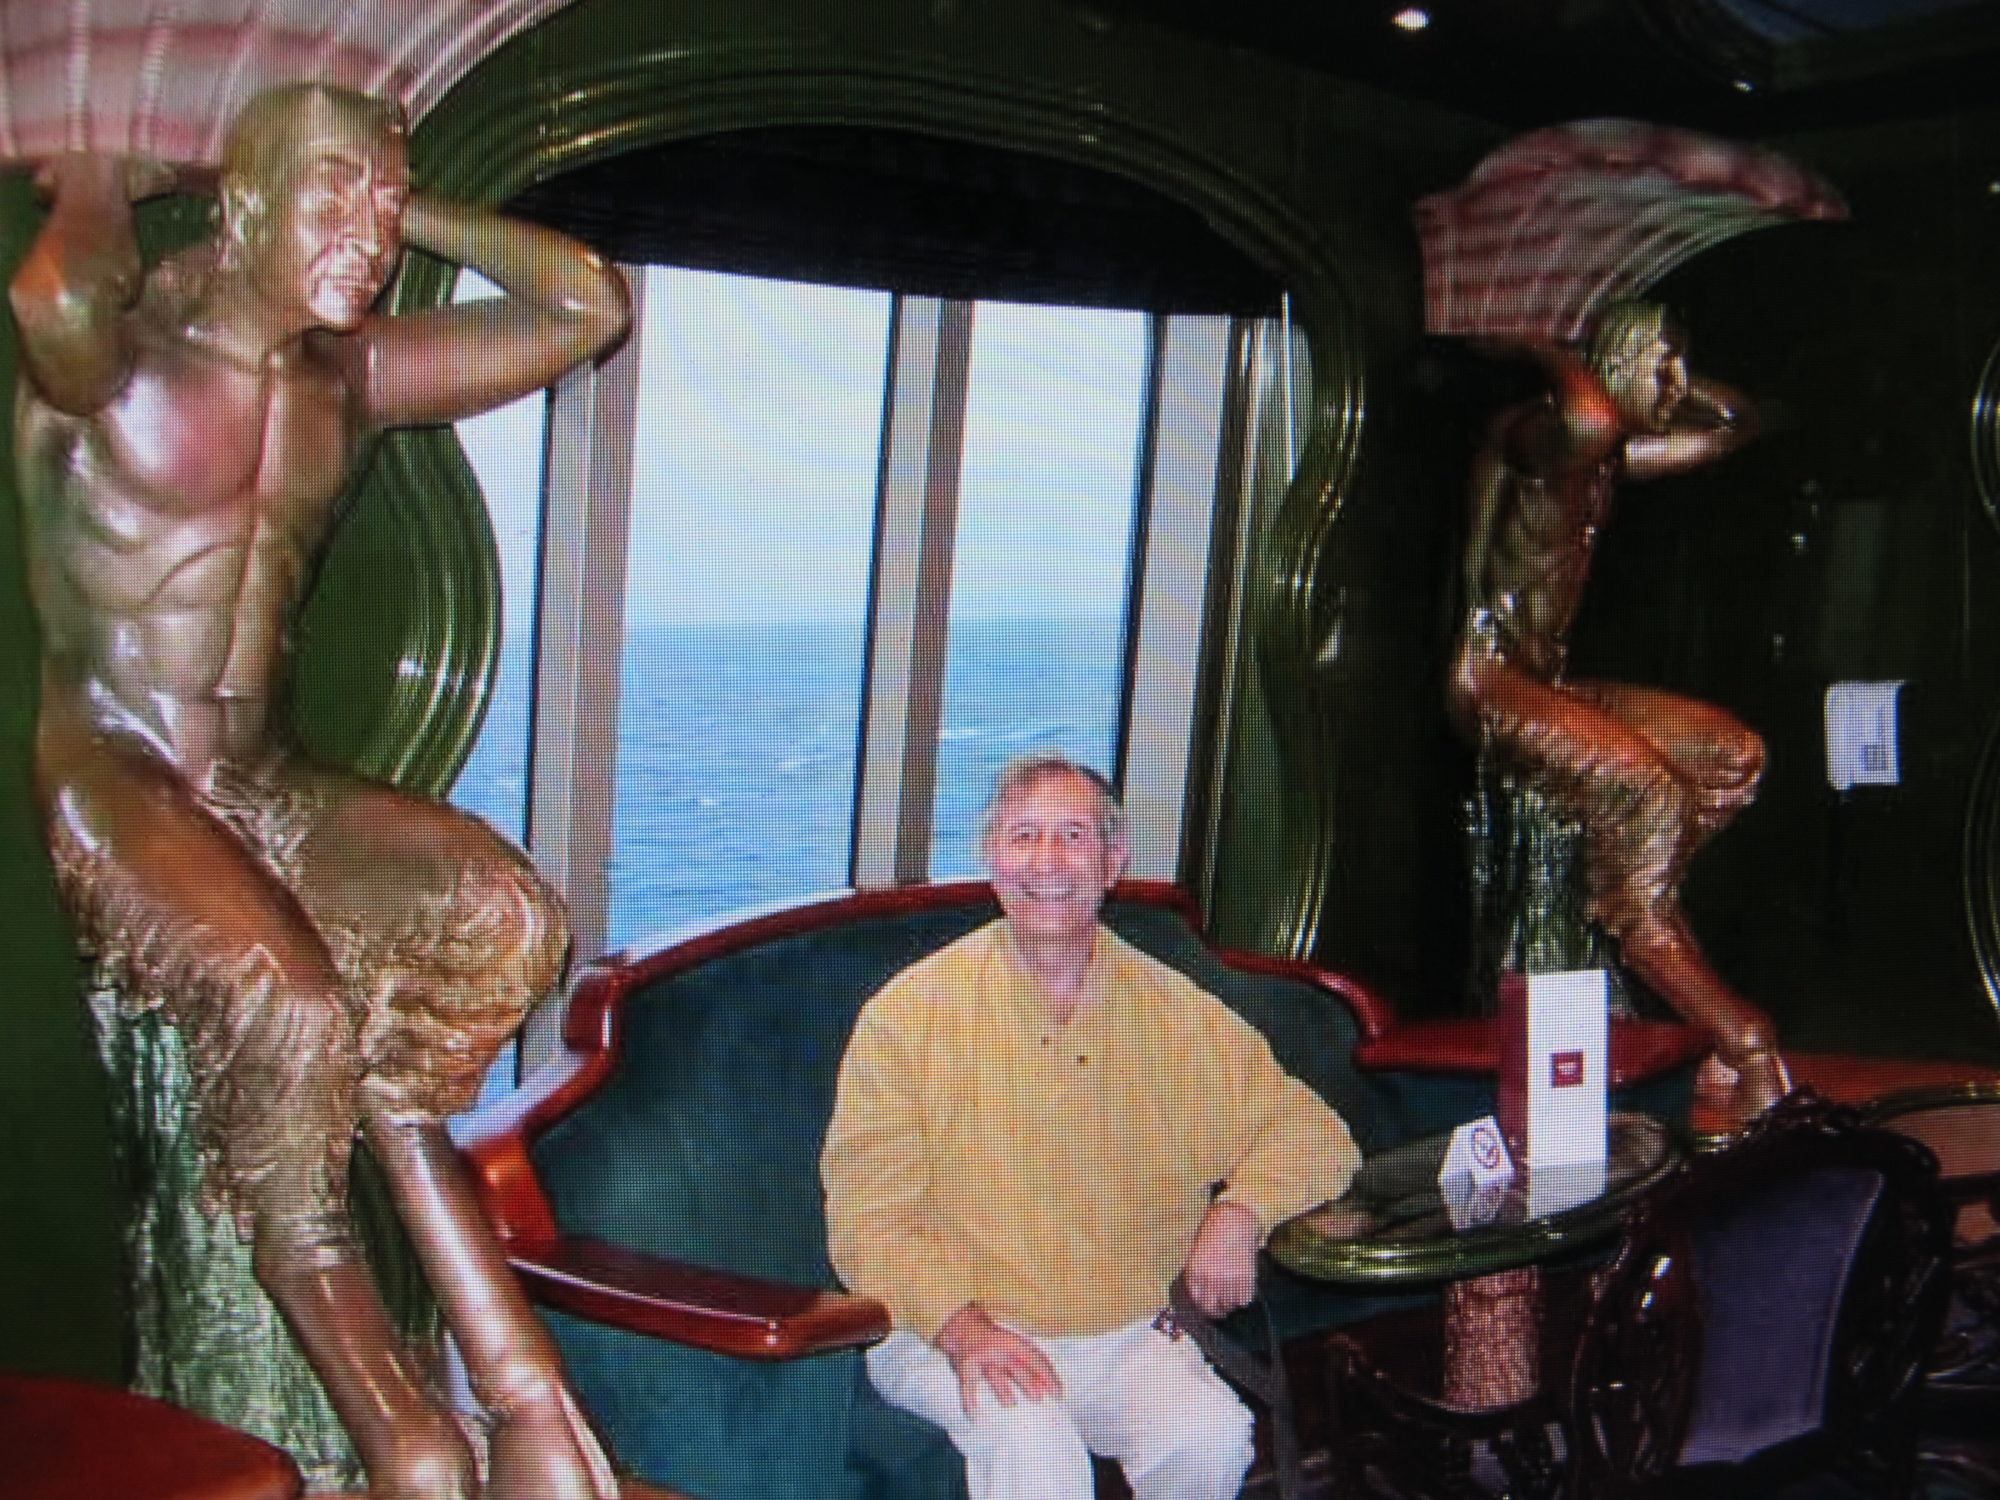 older man in yellow and khaki smiling in a fancy room on a cruise ship showing the ocean